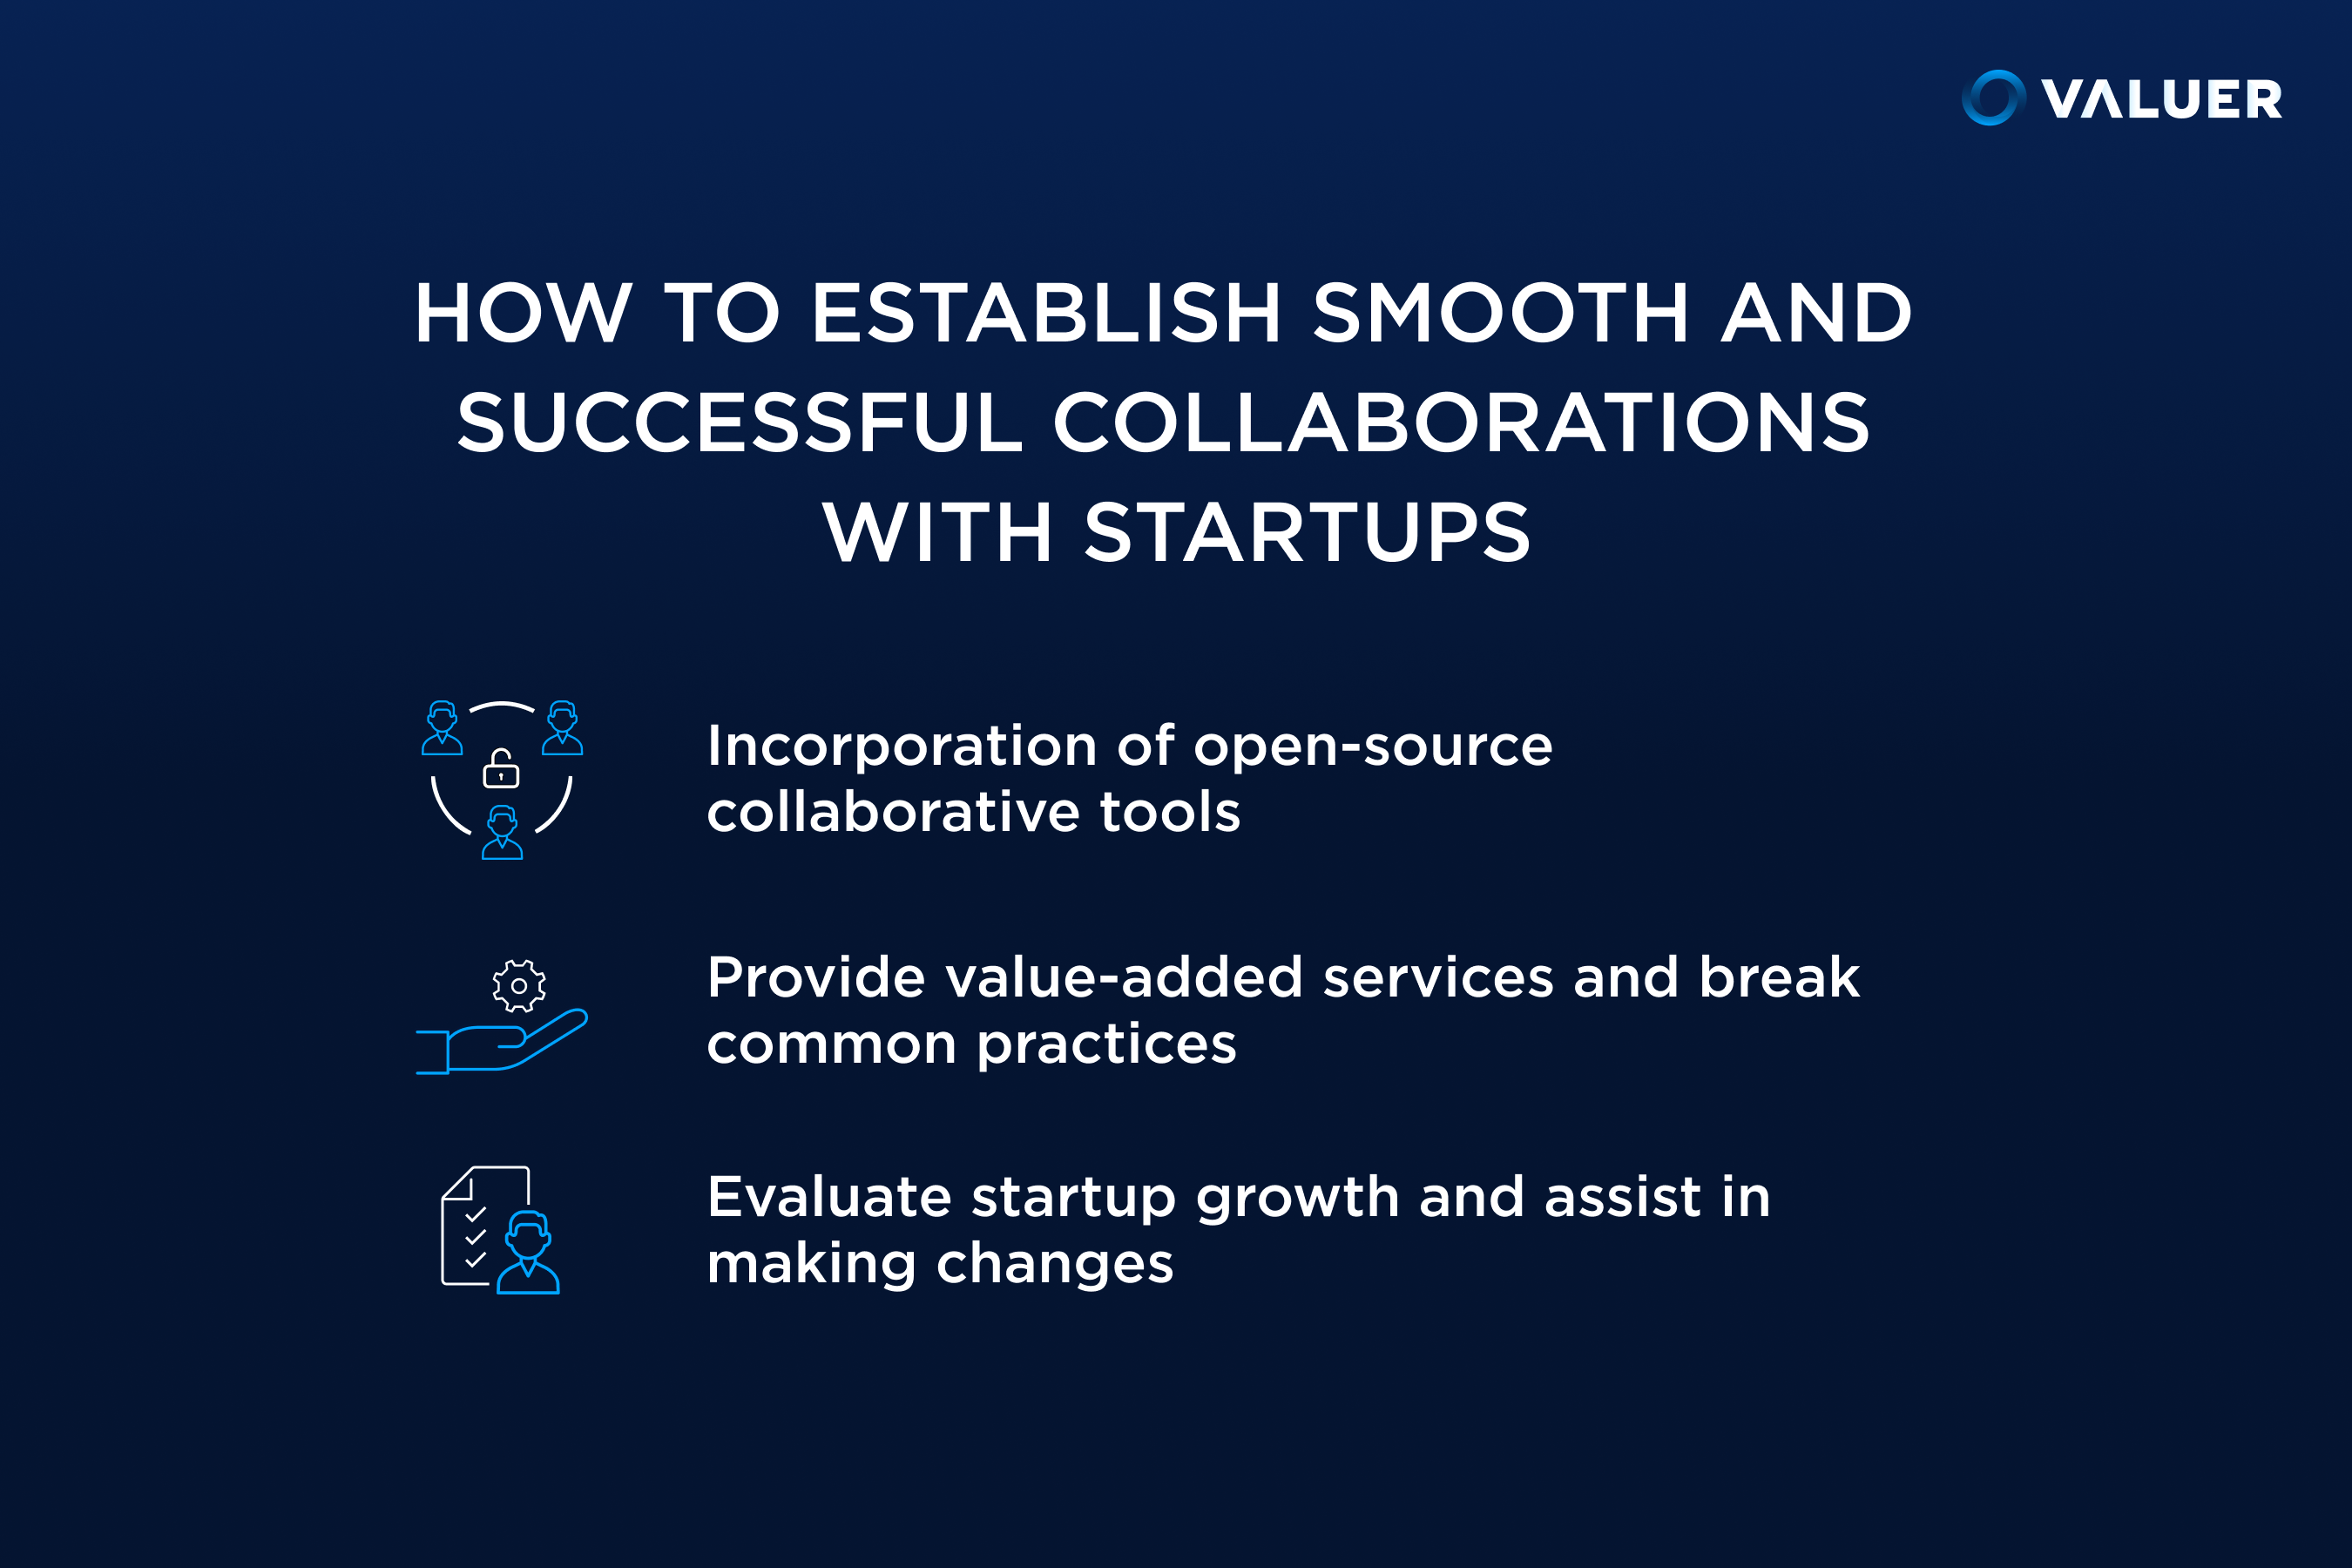 3 ways to establish a smooth and successful collaboration with startups